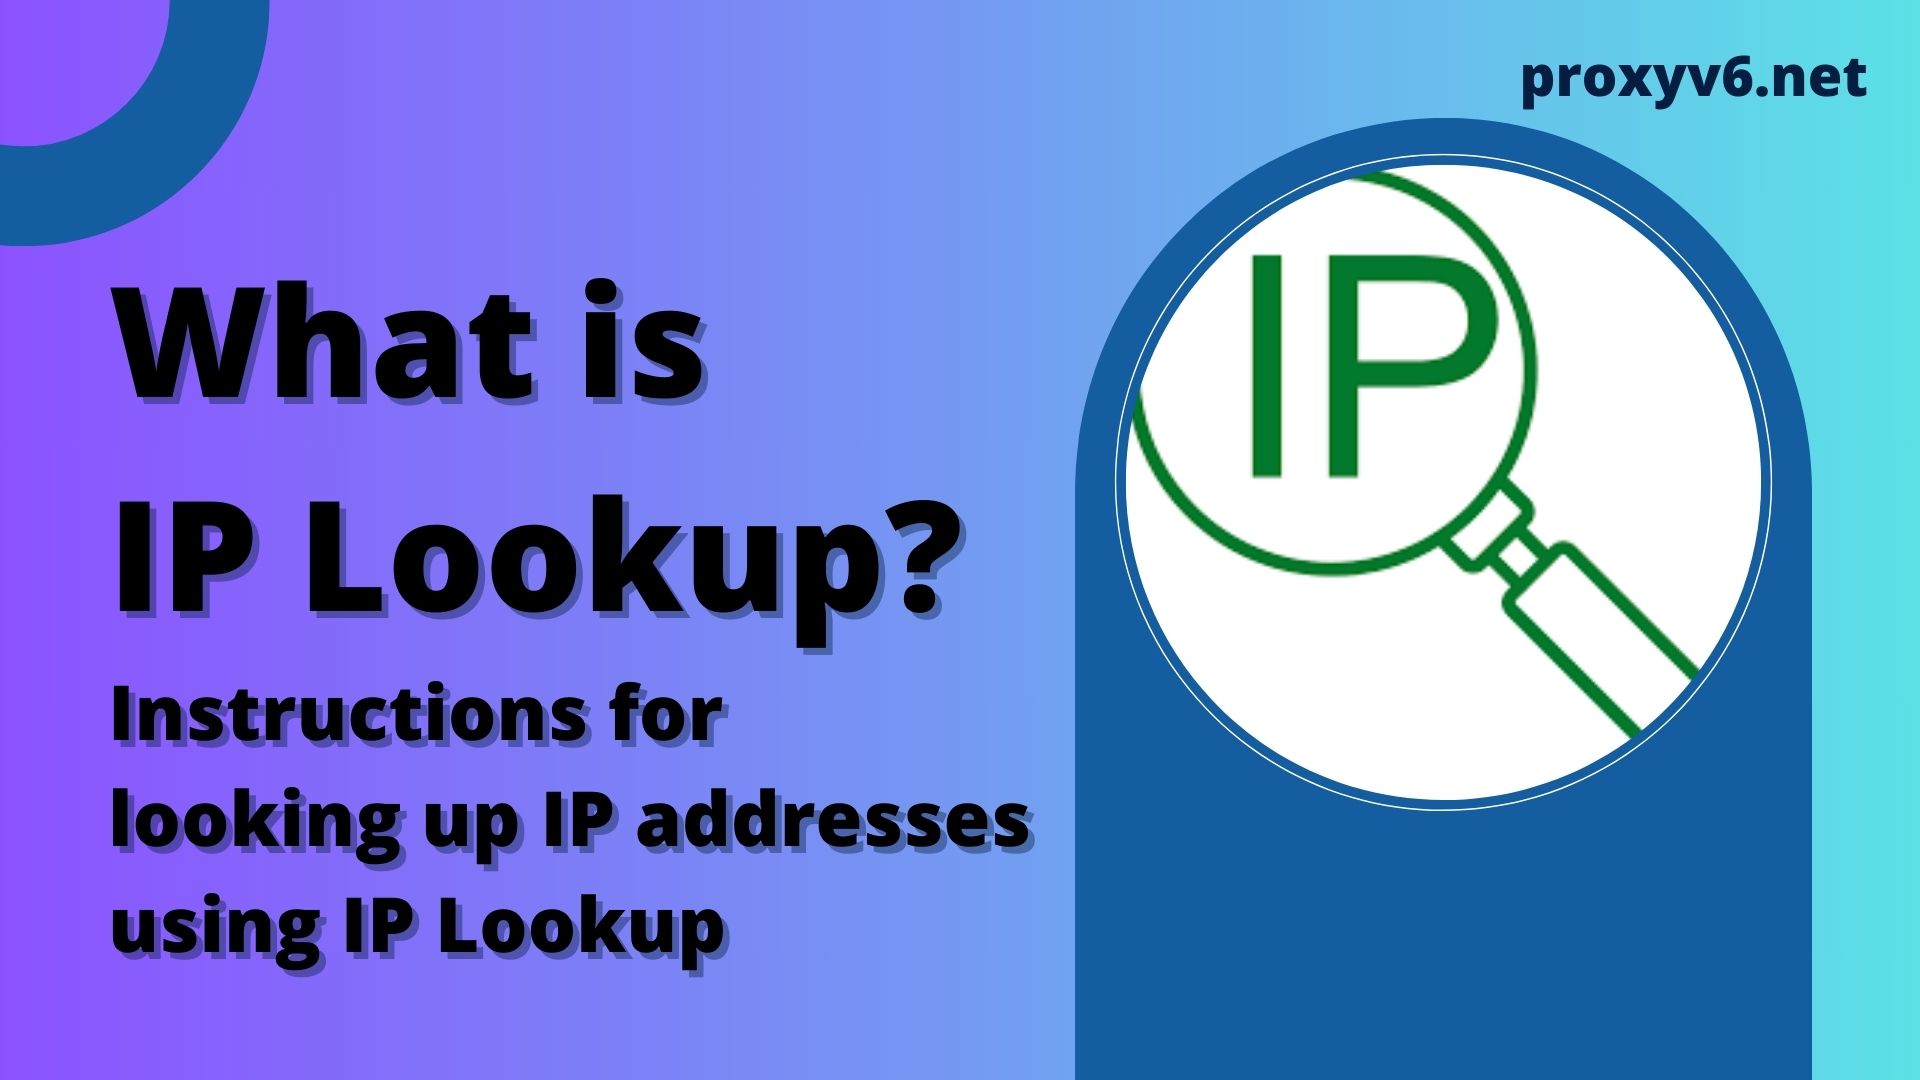 What is IP Lookup? Instructions for looking up IP addresses using IP Lookup